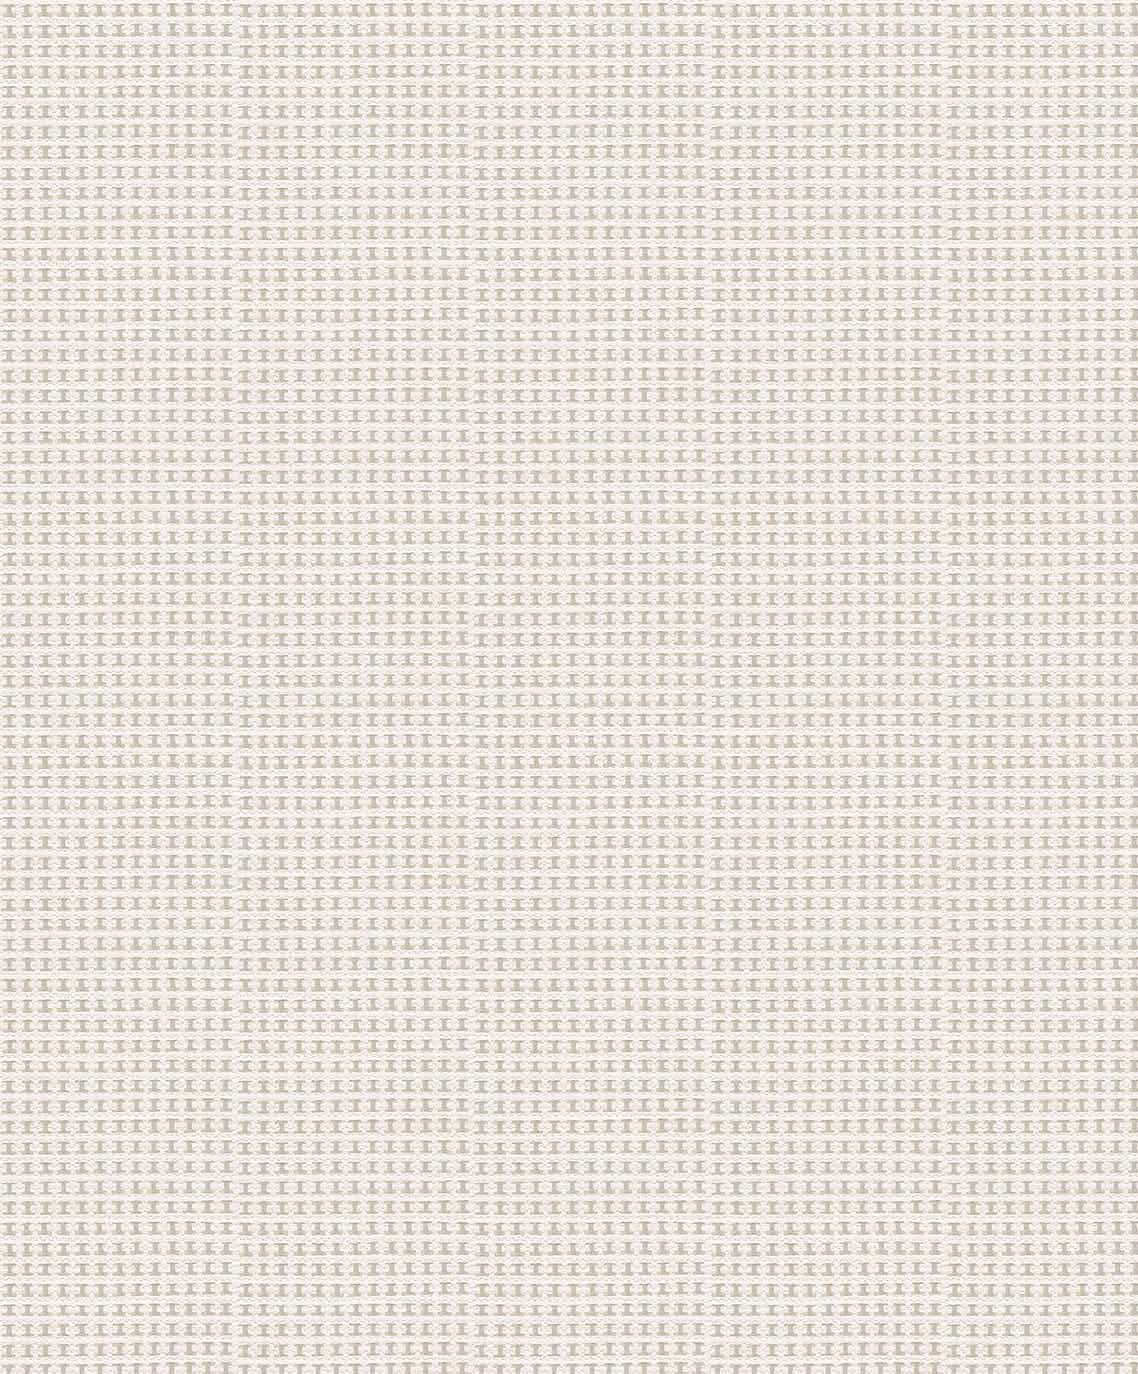 Newroom Graphic Beige Geometric Structure Graphic Non-Woven Wallpaper Modern Including Wallpaper Guide Graphic